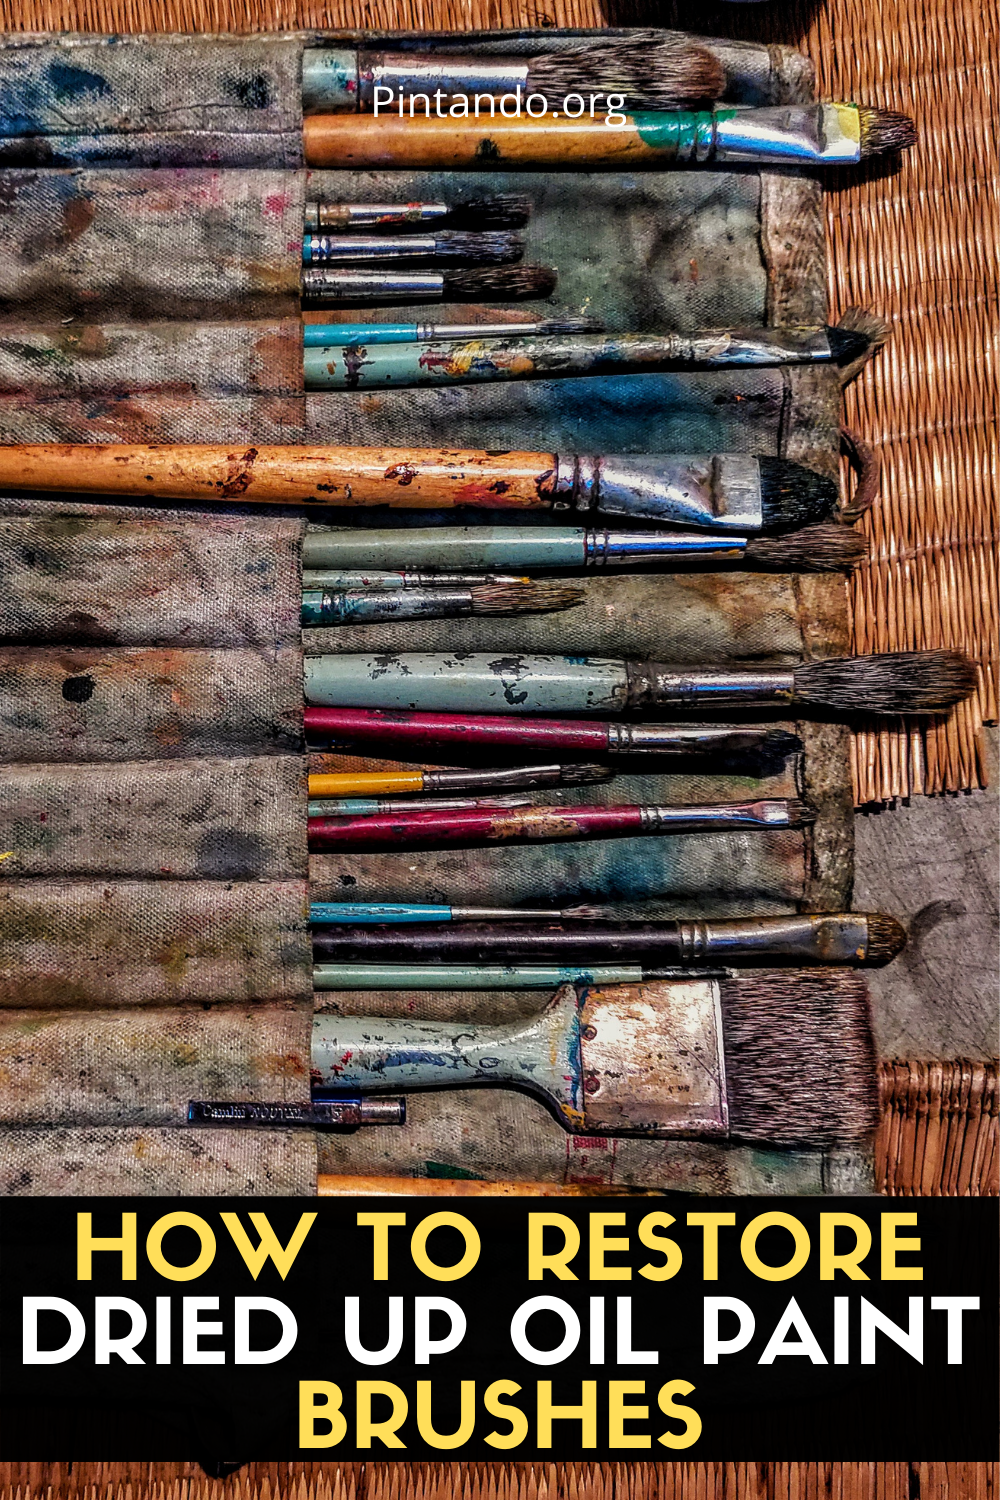 HOW TO RESTORE DRIED UP OIL PAINT BRUSHES (1)